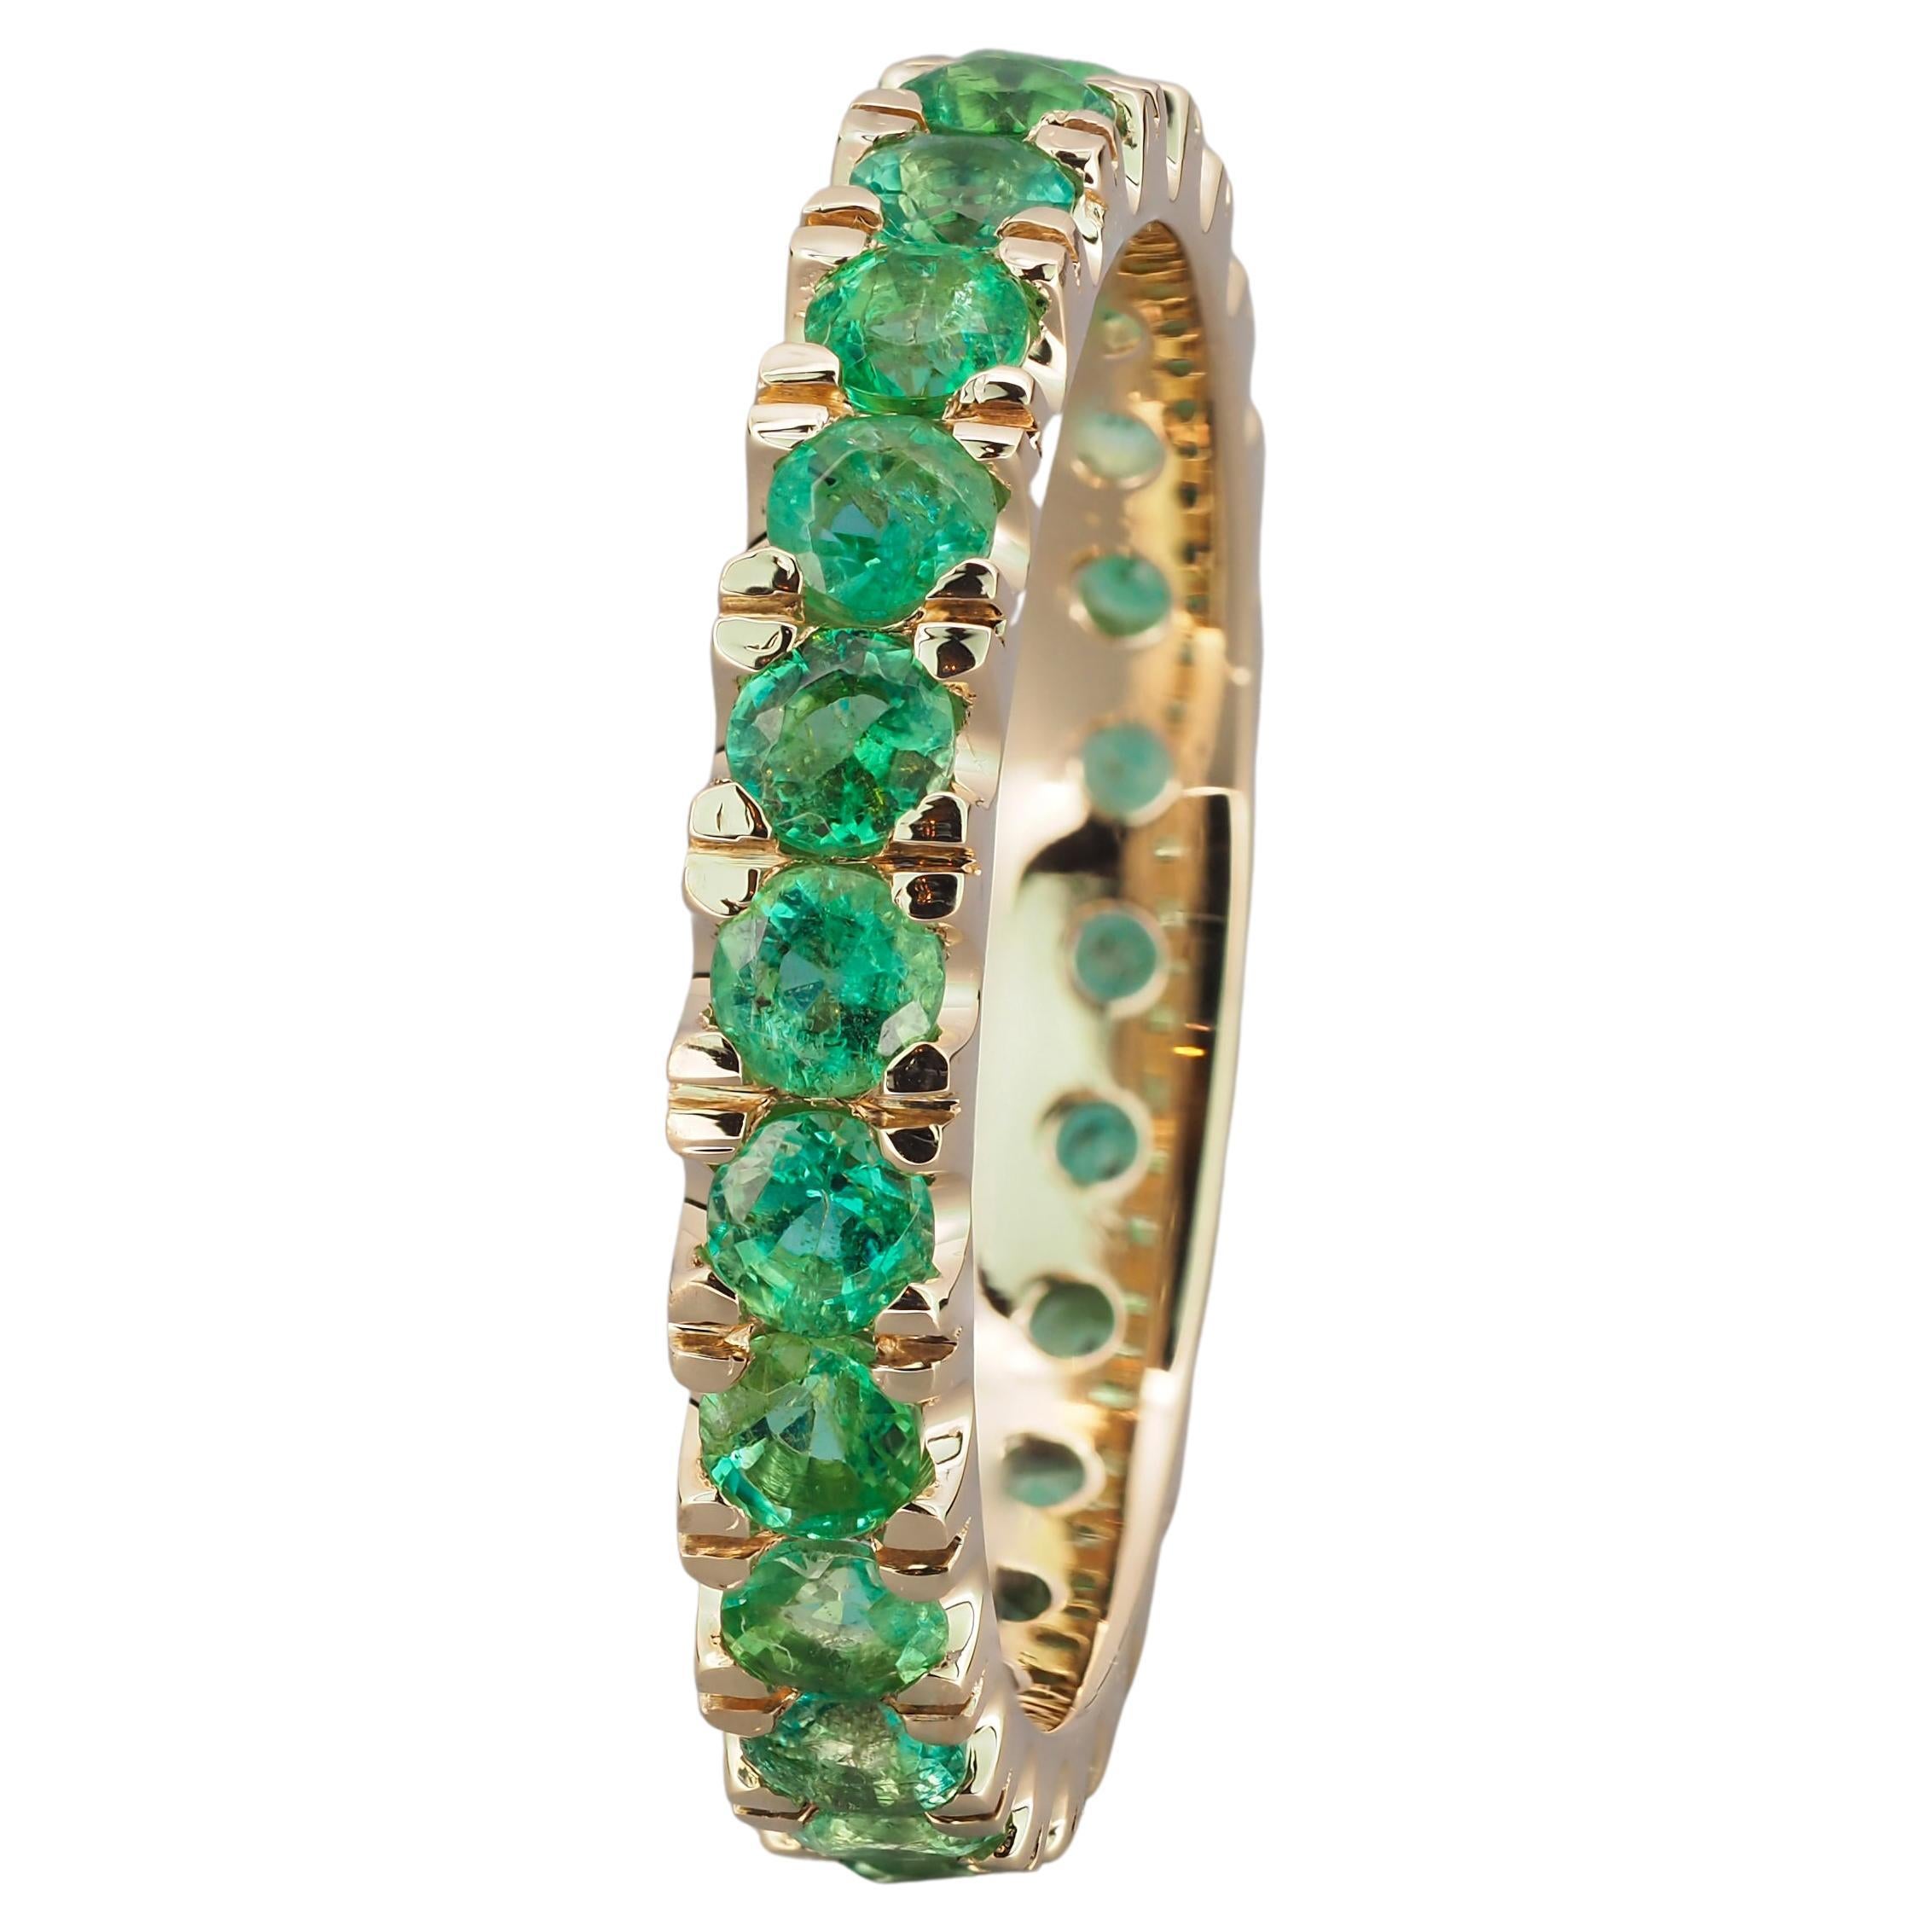 14 K Gold Eternity Ring with Emerald, Stackable Emerald Ring